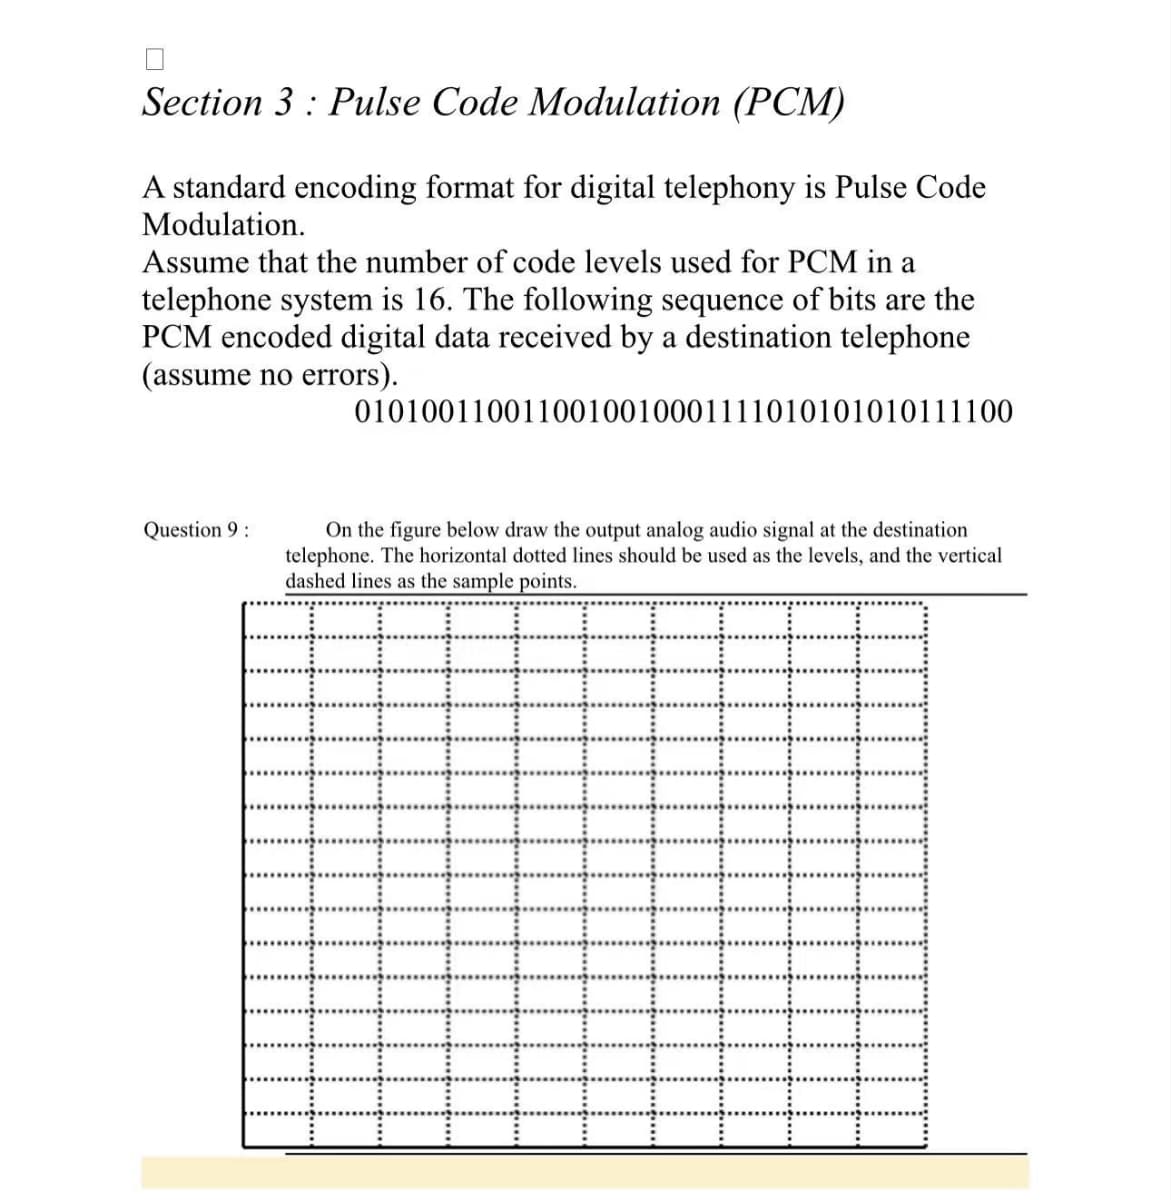 Section 3: Pulse Code Modulation (PCM)
A standard encoding format for digital telephony is Pulse Code
Modulation.
Assume that the number of code levels used for PCM in a
telephone system is 16. The following sequence of bits are the
PCM encoded digital data received by a destination telephone
(assume no errors).
Question 9:
0101001100110010010001111010101010111100
On the figure below draw the output analog audio signal at the destination
telephone. The horizontal dotted lines should be used as the levels, and the vertical
dashed lines as the sample points.